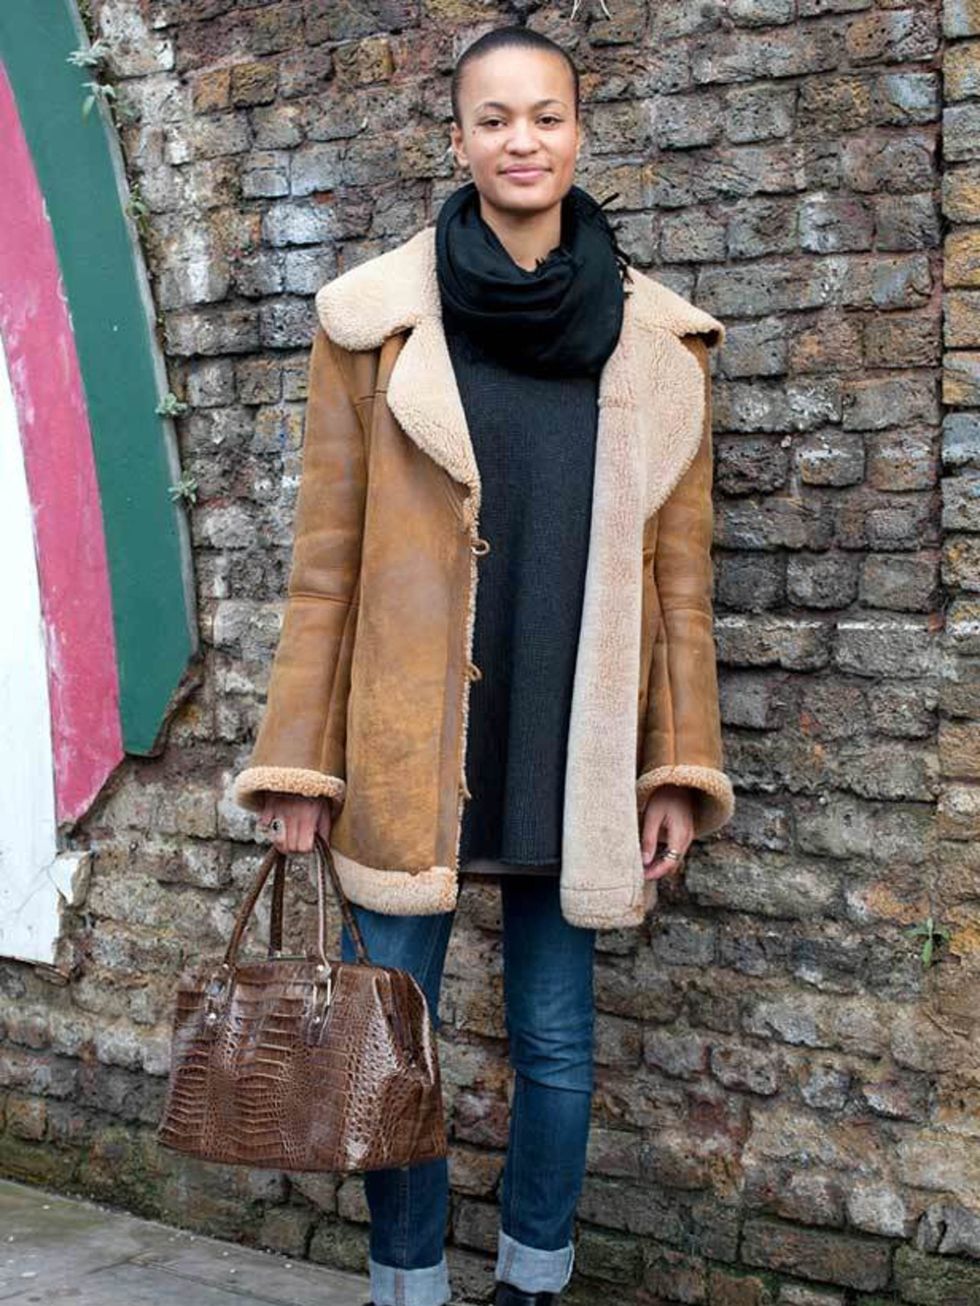 <p>Photo by Kirstin Sinclair.Lisa, 20, Student. Vintage coat &amp; bag, Zara jumper, H&amp;M jeans &amp; scarf, boots from Italy. </p>